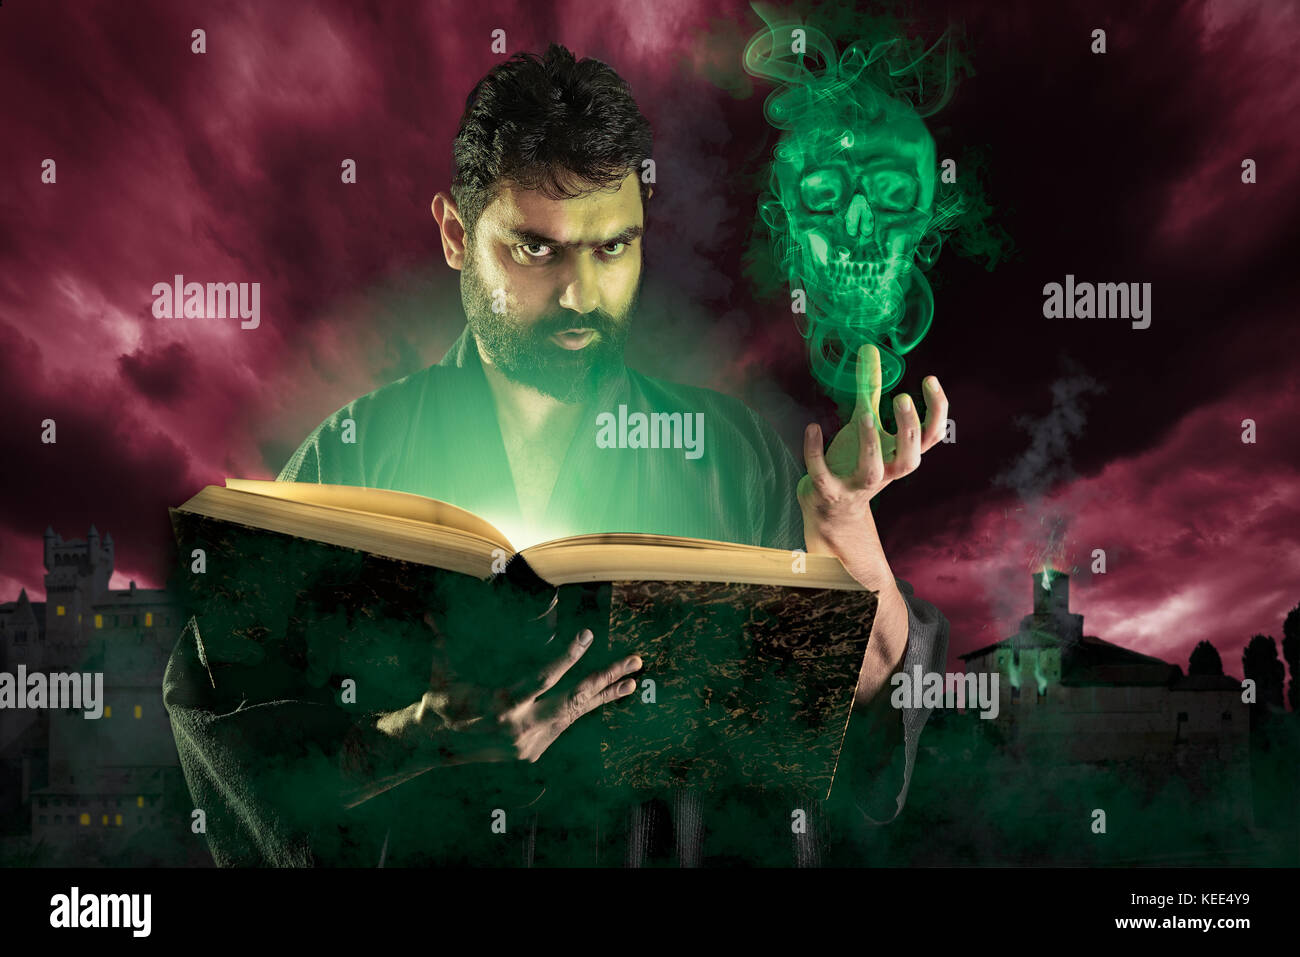 Male sorcerer casting a skull poison spell from a magic book as halloween image Stock Photo